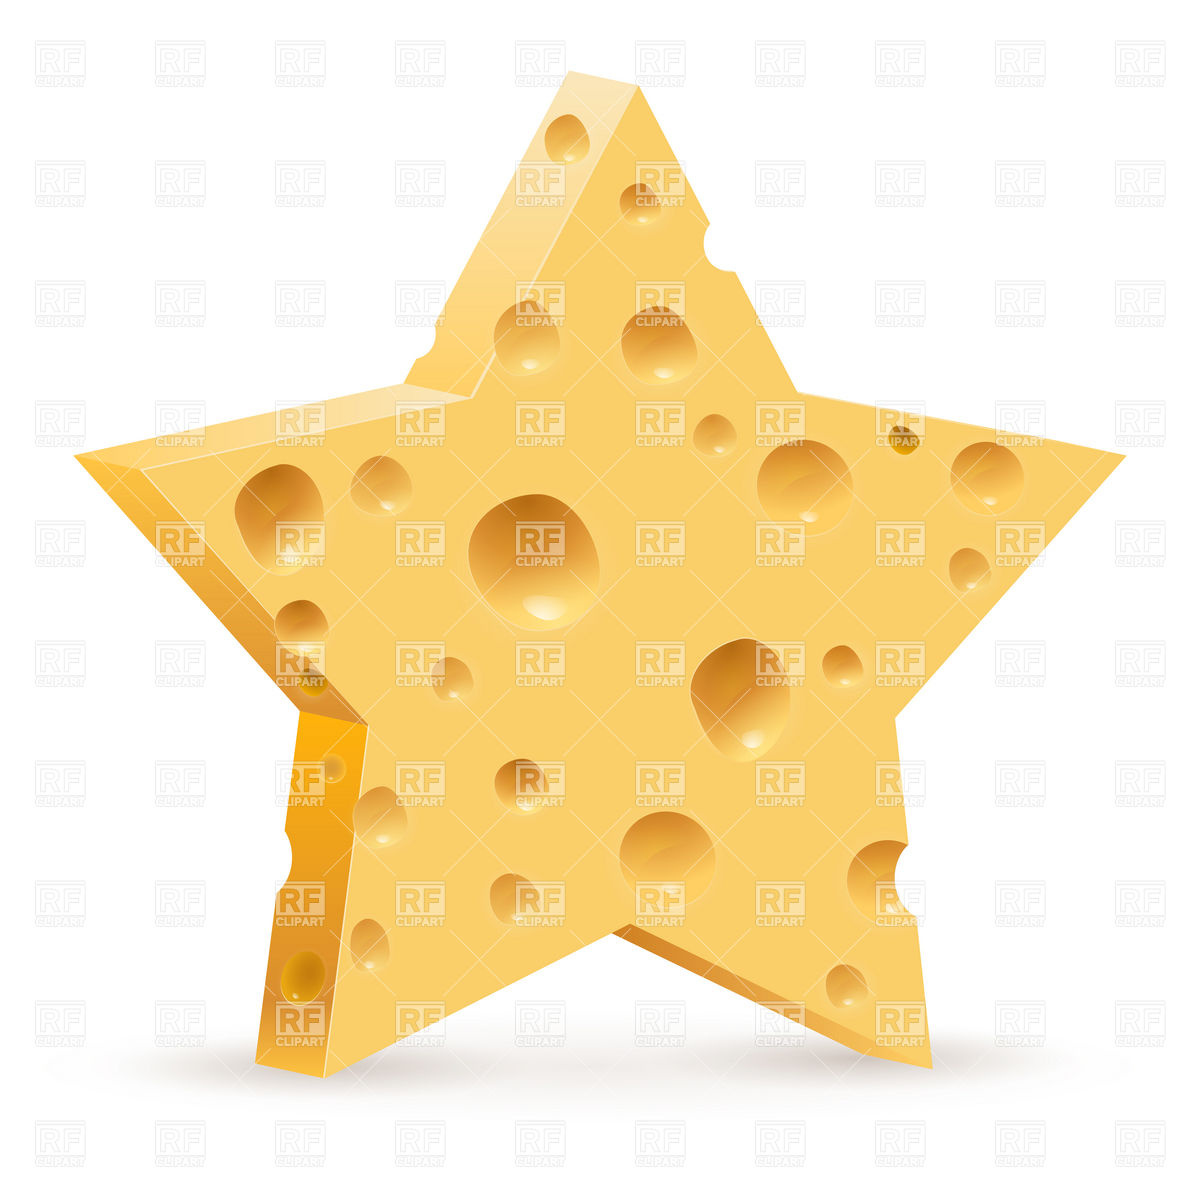 Star Shaped Cheese Piece 16127 Food And Beverages Download Royalty